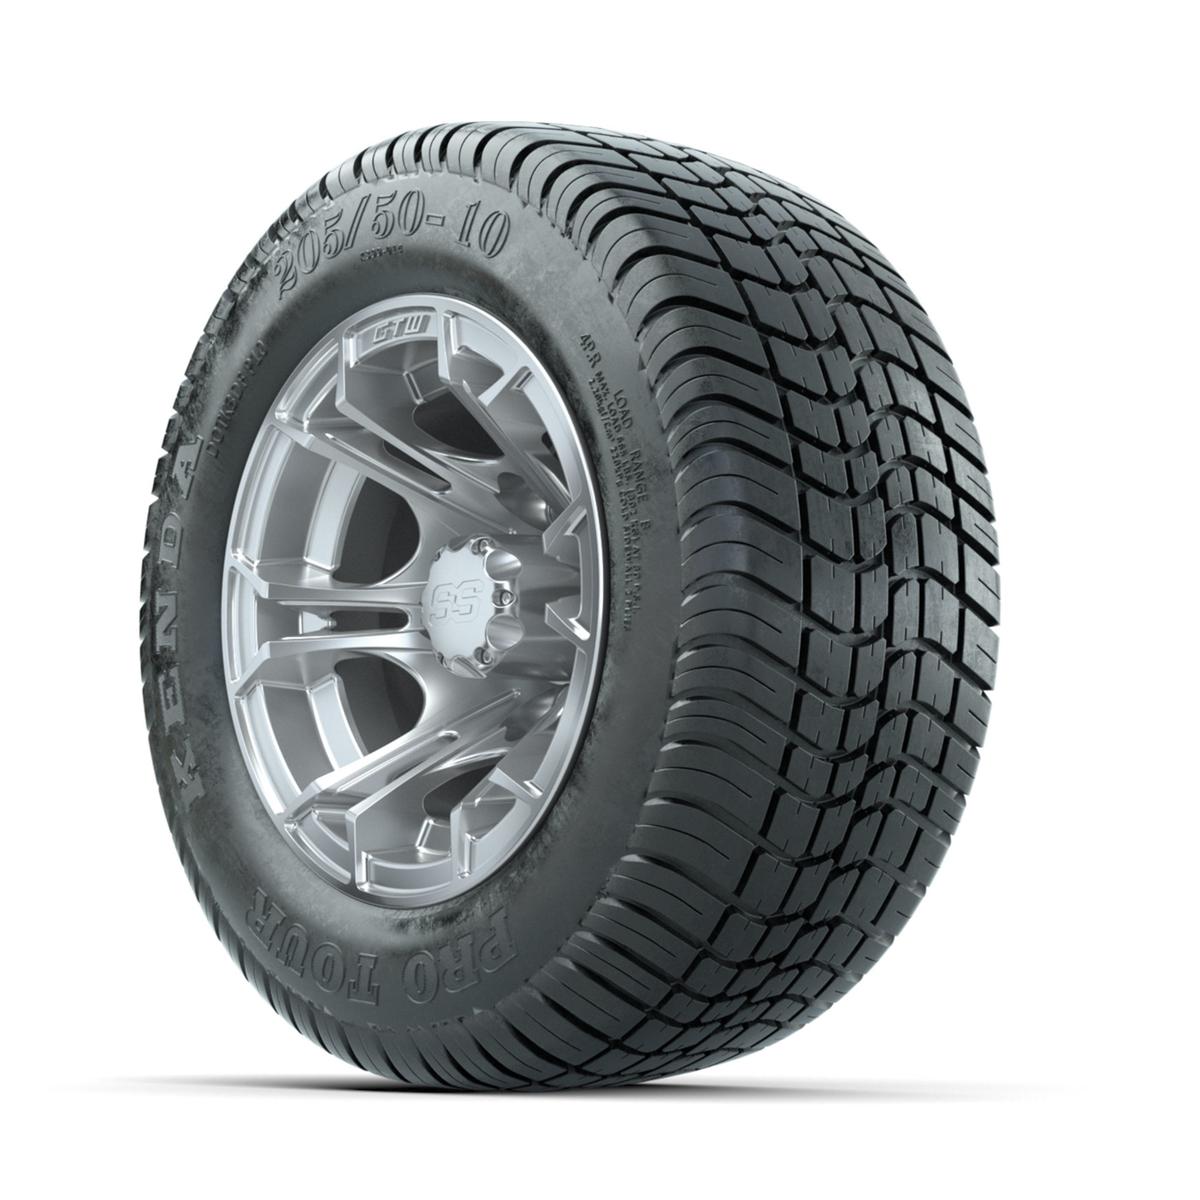 GTW Spyder Silver Brush 10 in Wheels with 205/50-10 Kenda Pro Tour Low-profile Tires – Full Set